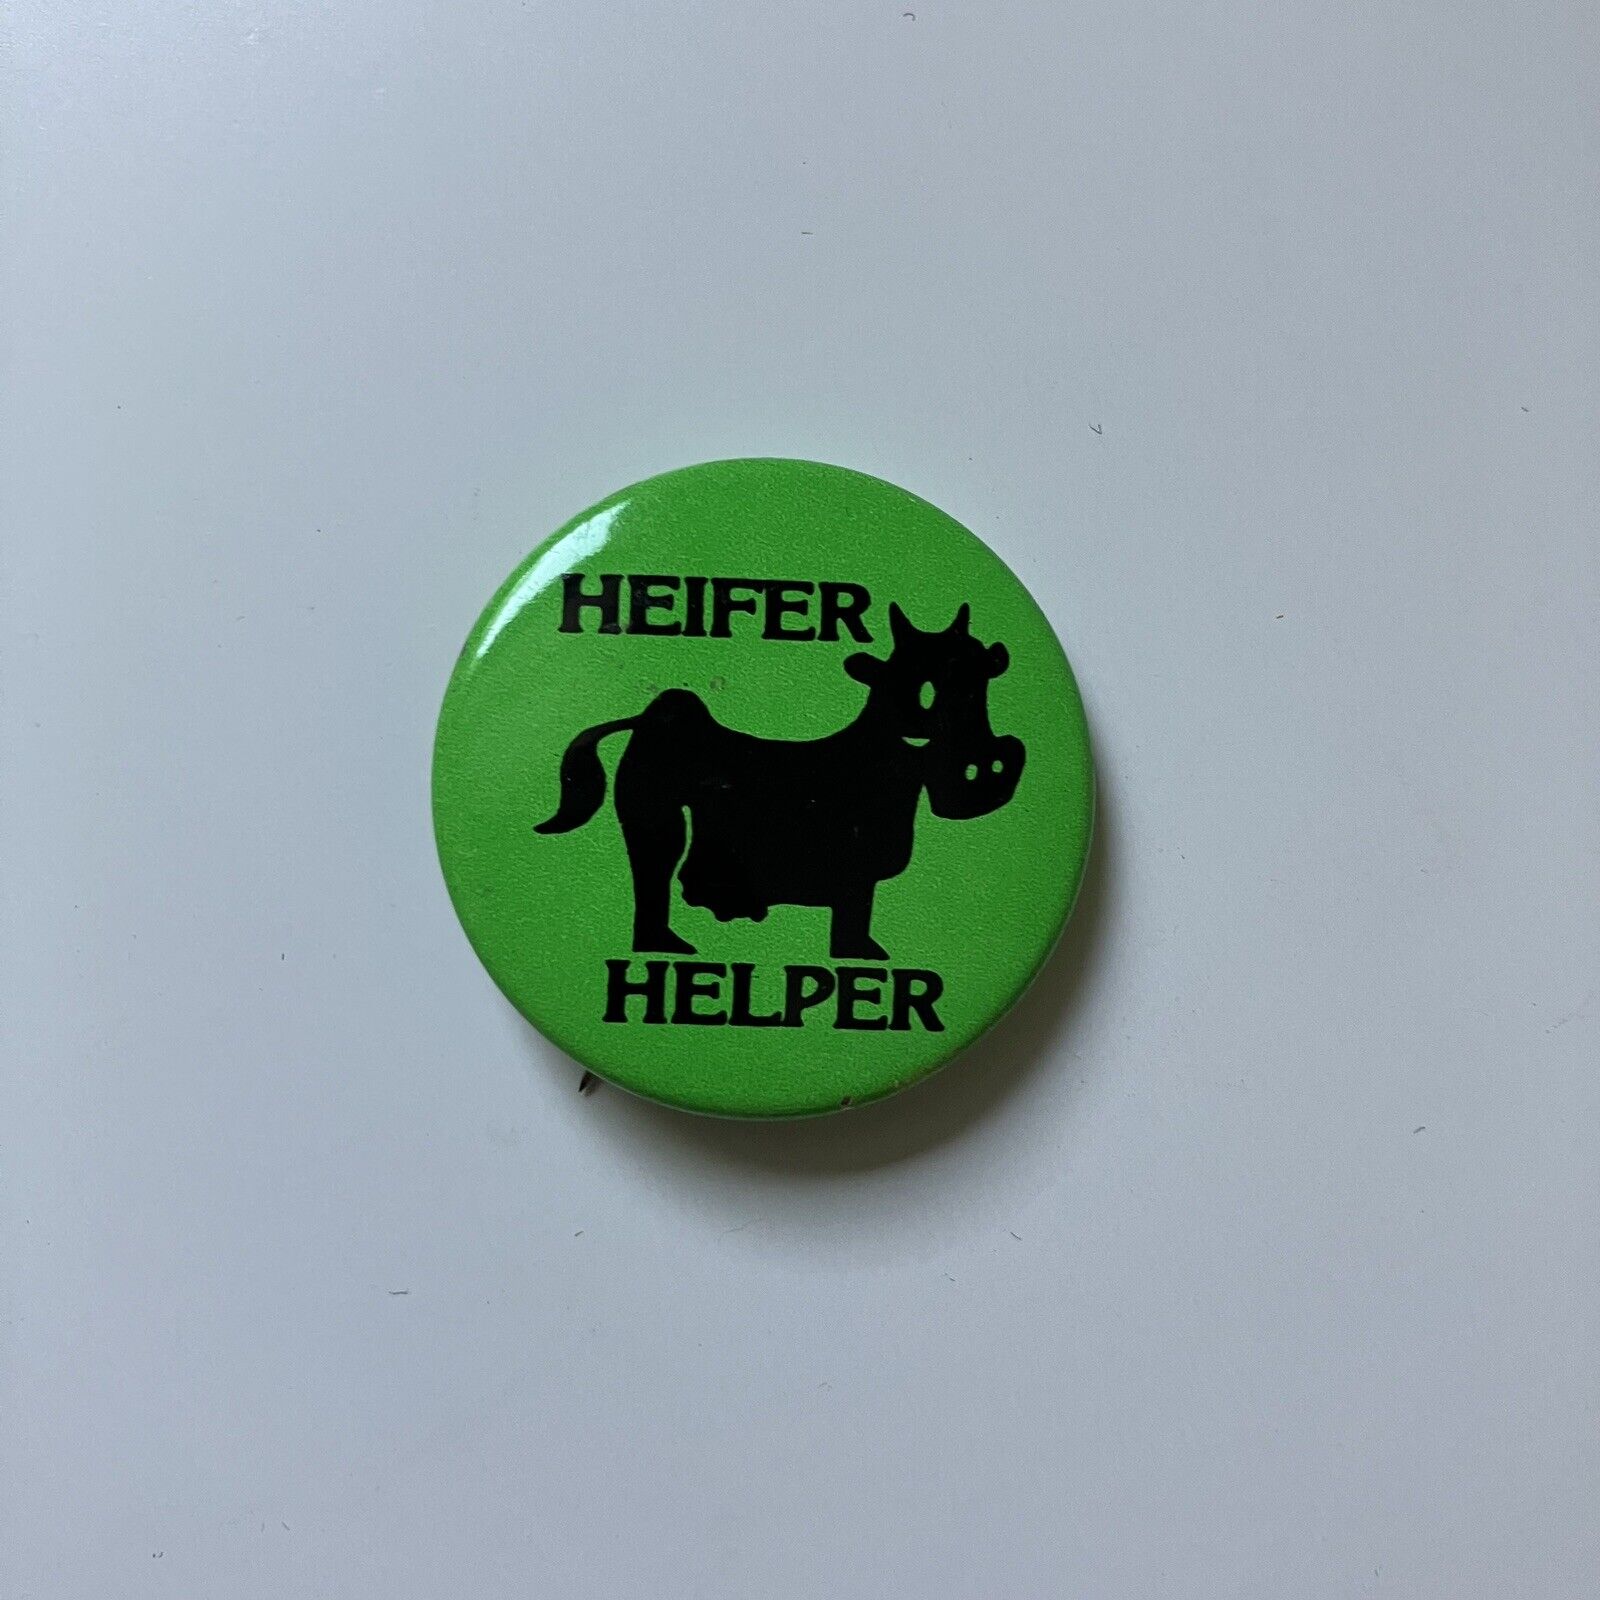 Vintage Button Pin Bright Green and Black Cow Silhouette Heifer Helper